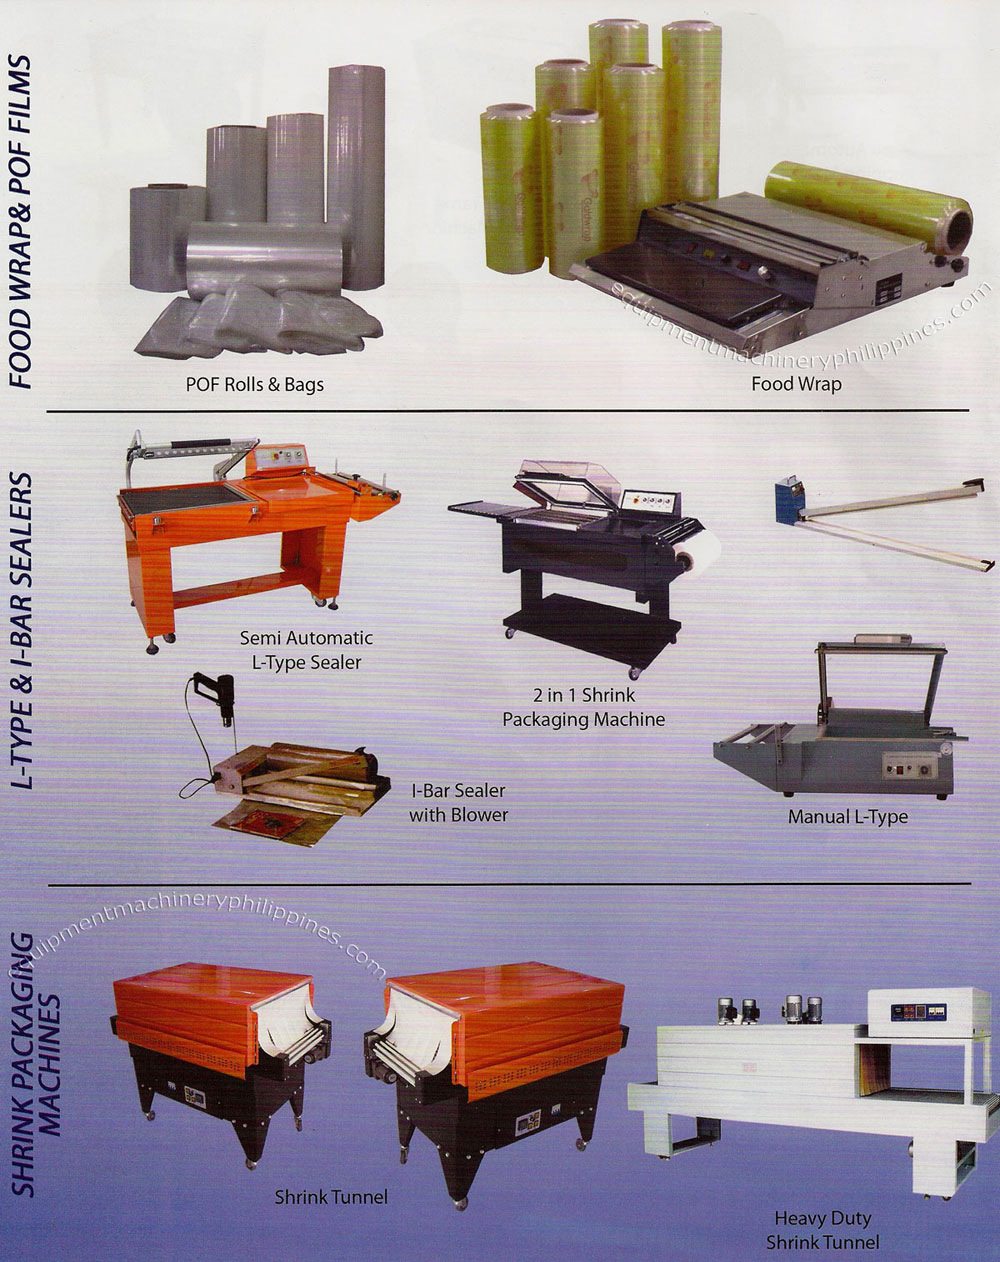 Food Wraps and POF Films, L Type and I Bar Sealers, Shrink Packaging Machines